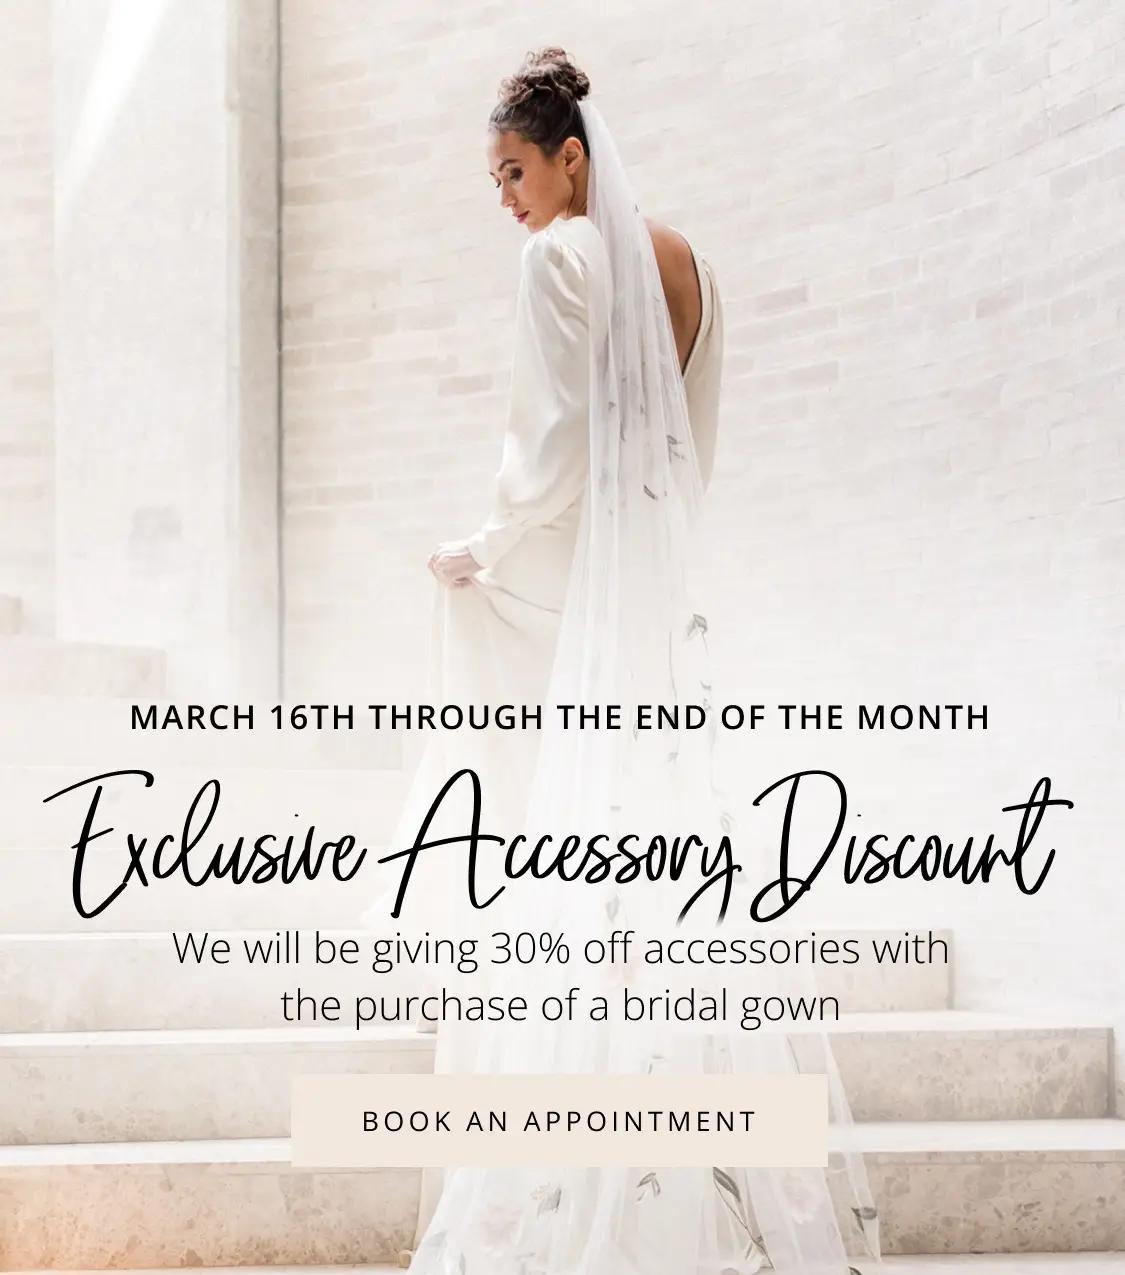 Exclusive Accessory Discount banner mobile